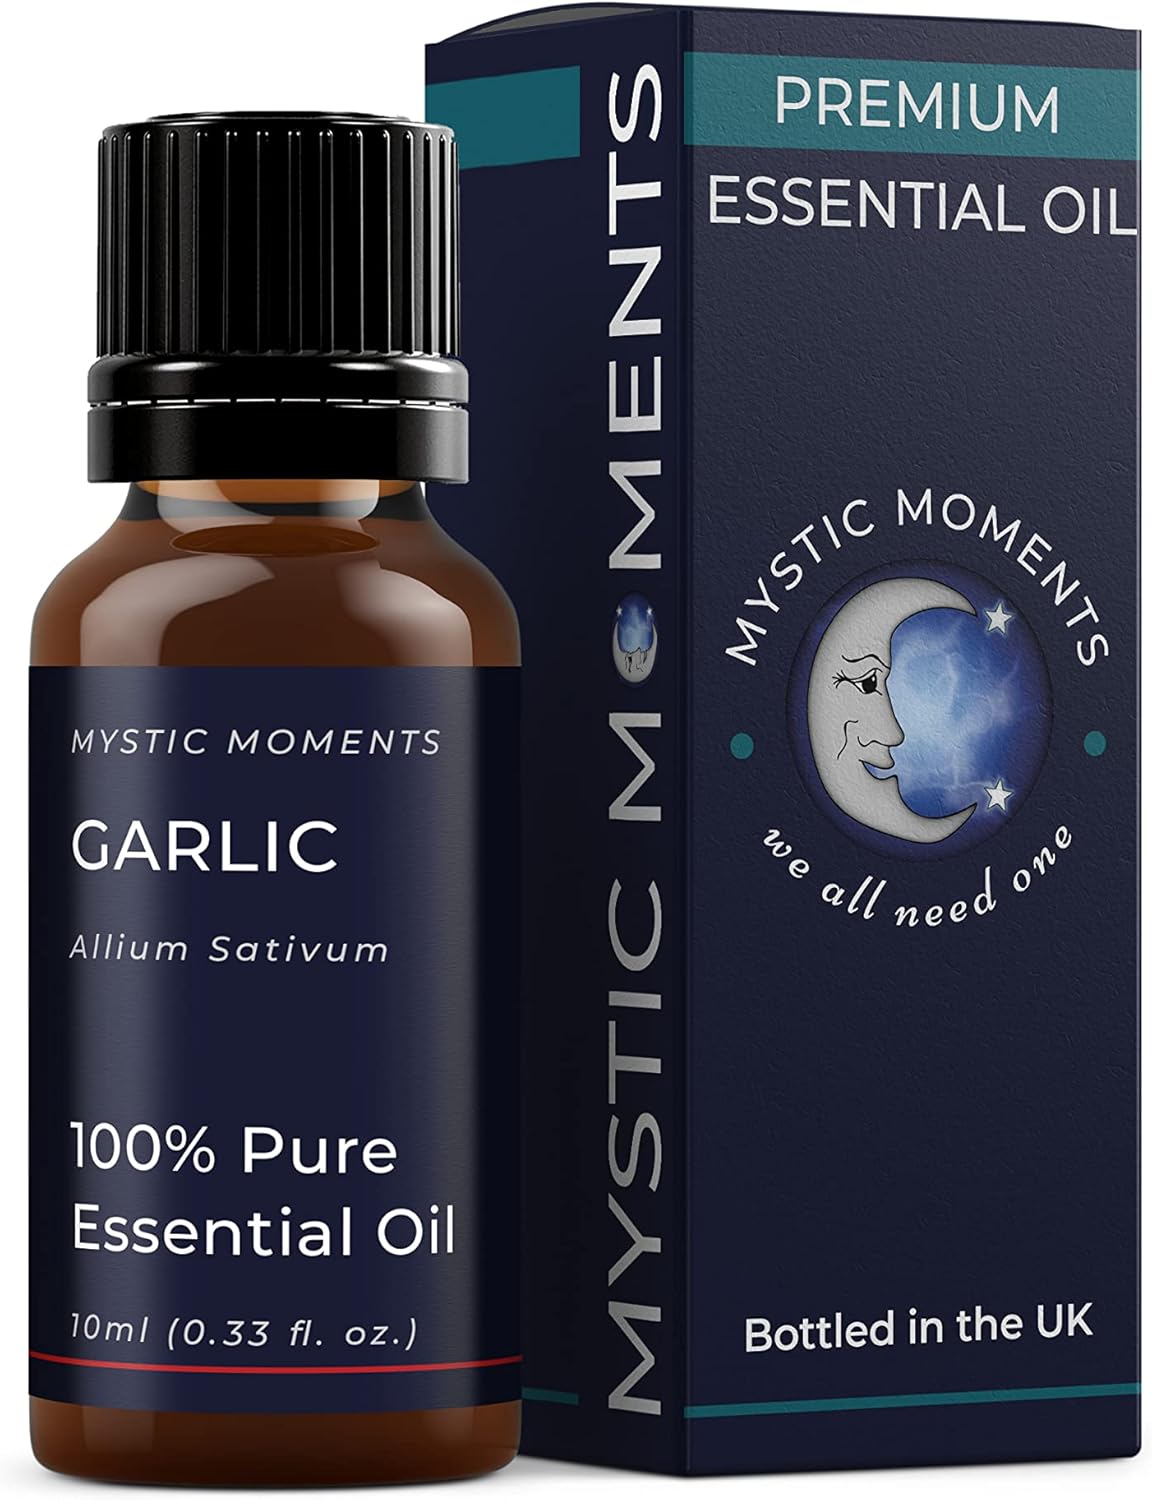 Mystic Moments | Garlic Essential Oil 10ml - Pure & Natural oil for Diffusers, Aromatherapy & Massage Blends Vegan GMO Free